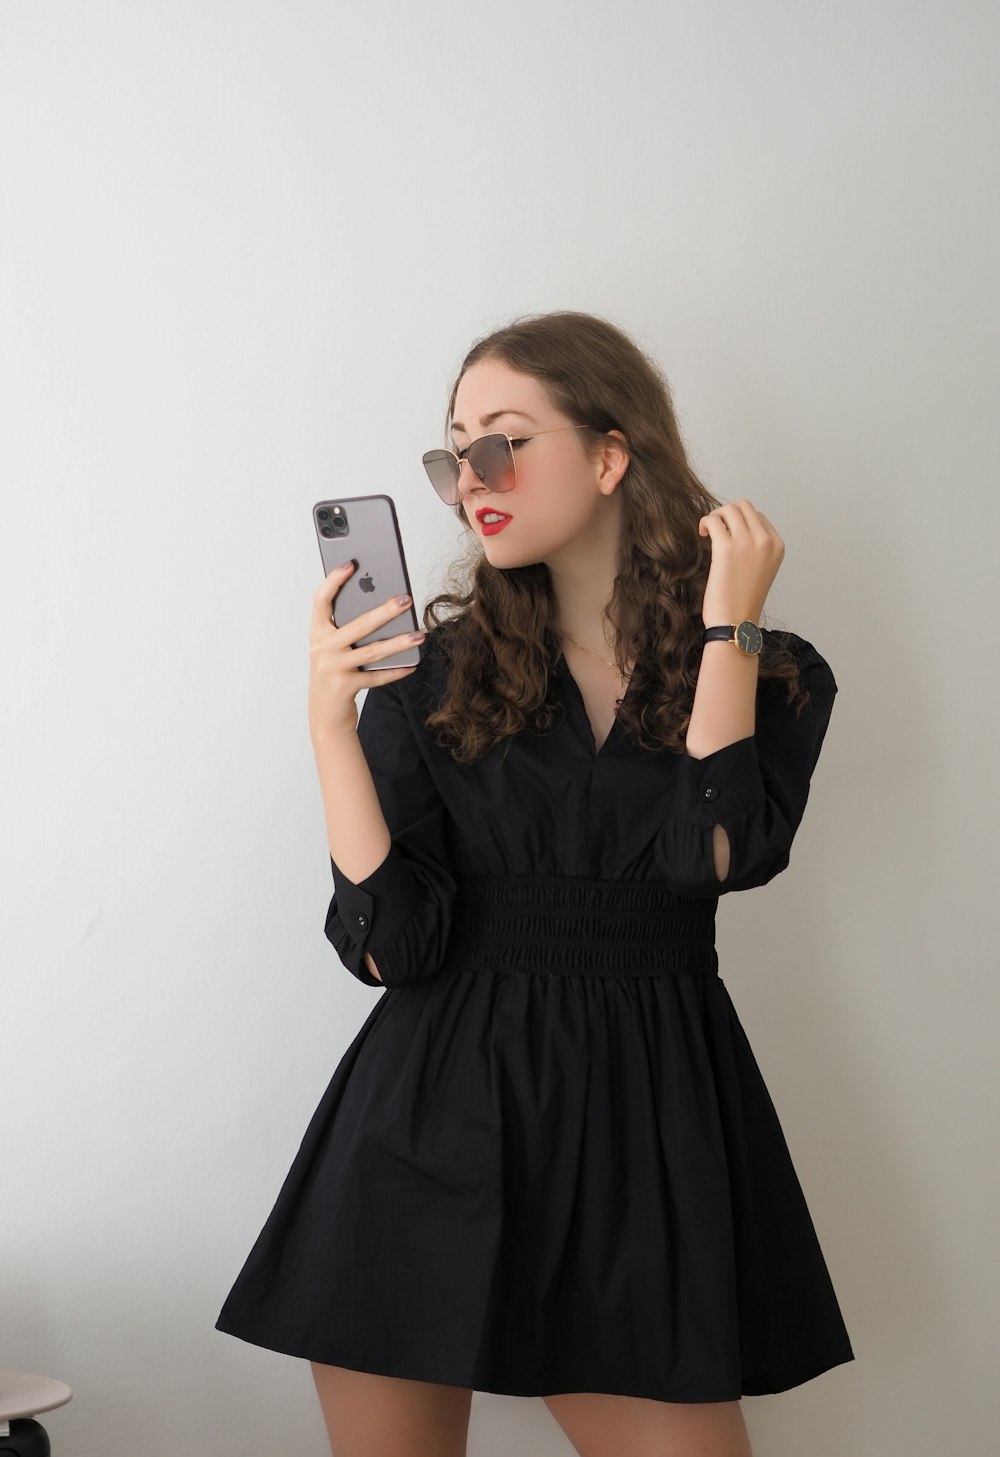 a woman in a black dress holding a cell phone